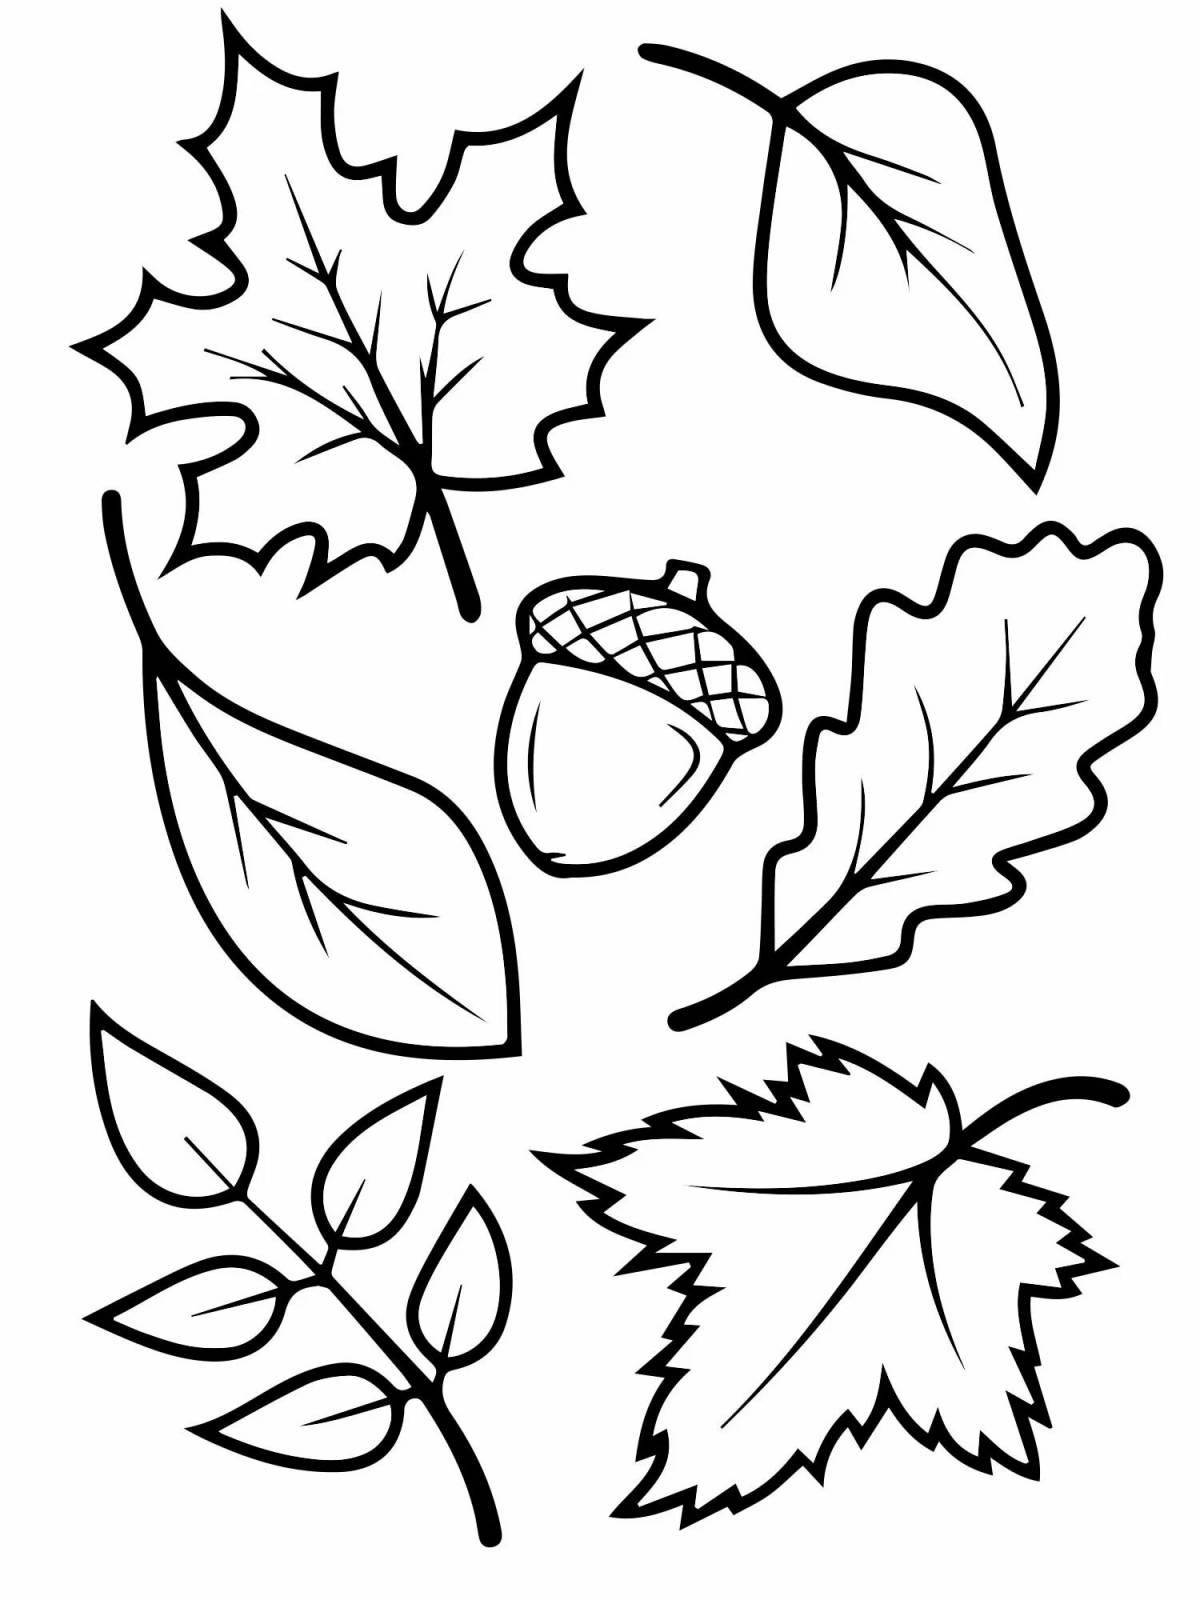 Elegant autumn coloring for children 6-7 years old